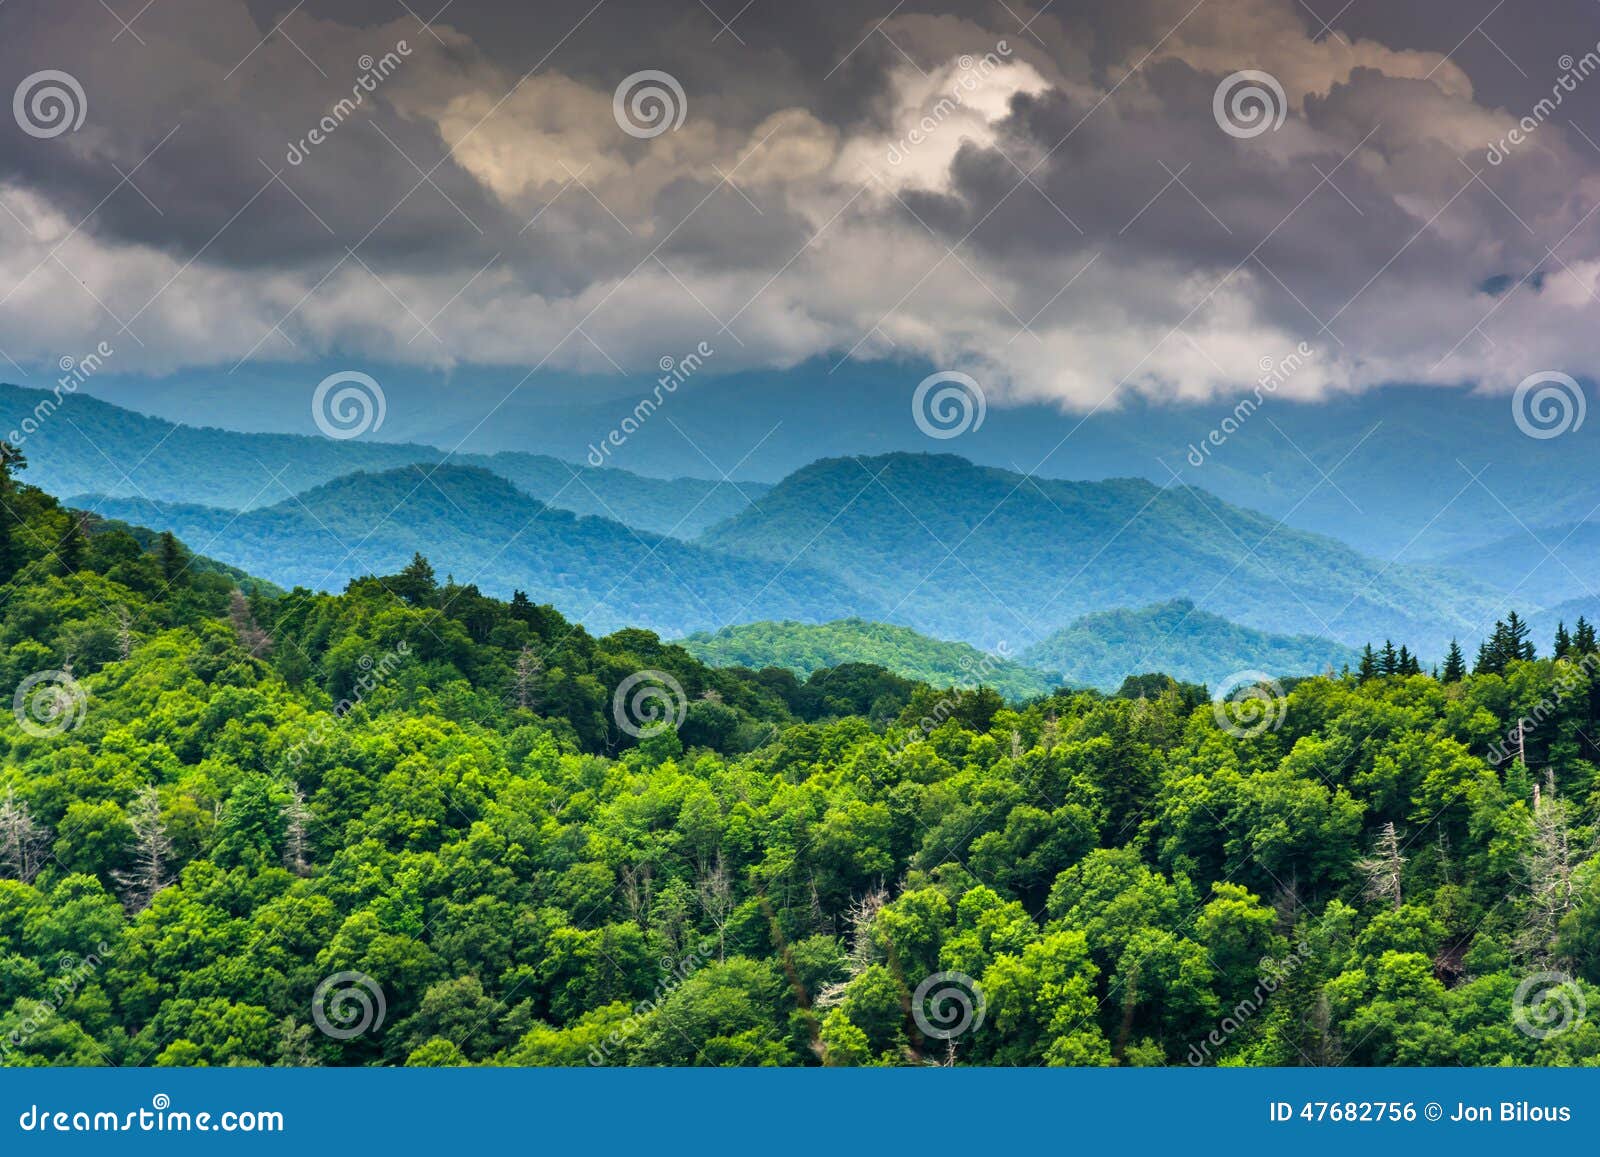 dramatic view of the appalachian mountains from newfound gap road, at great smoky mountains national park, tennessee.